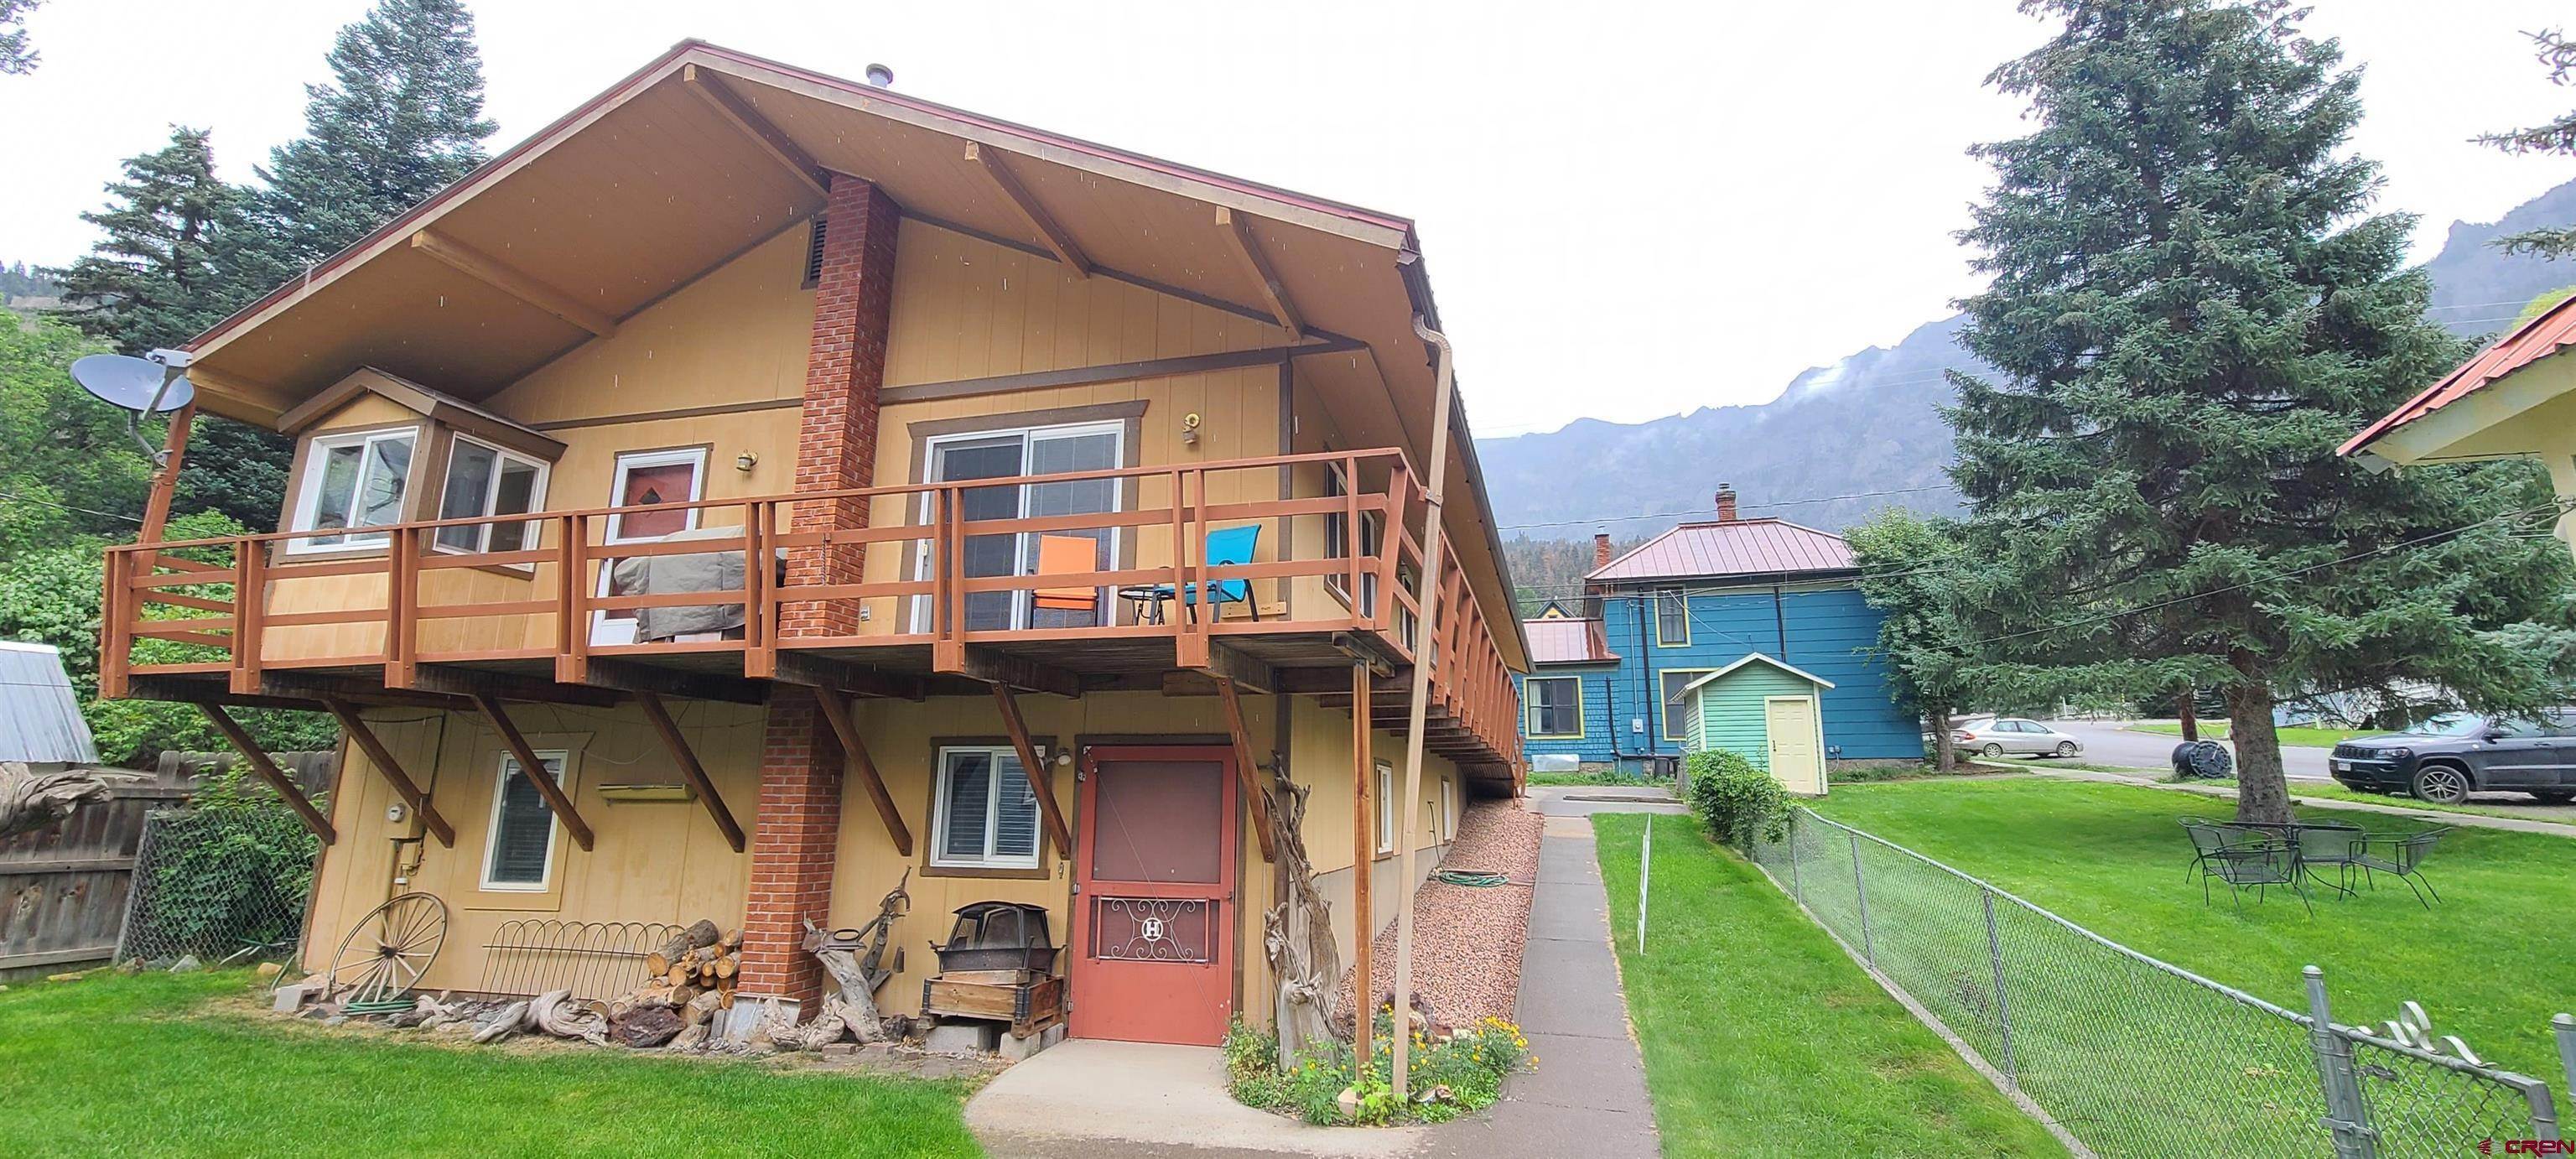 Single Family Homes for Active at 303 1/2 2nd Street Ouray, Colorado 81427 United States